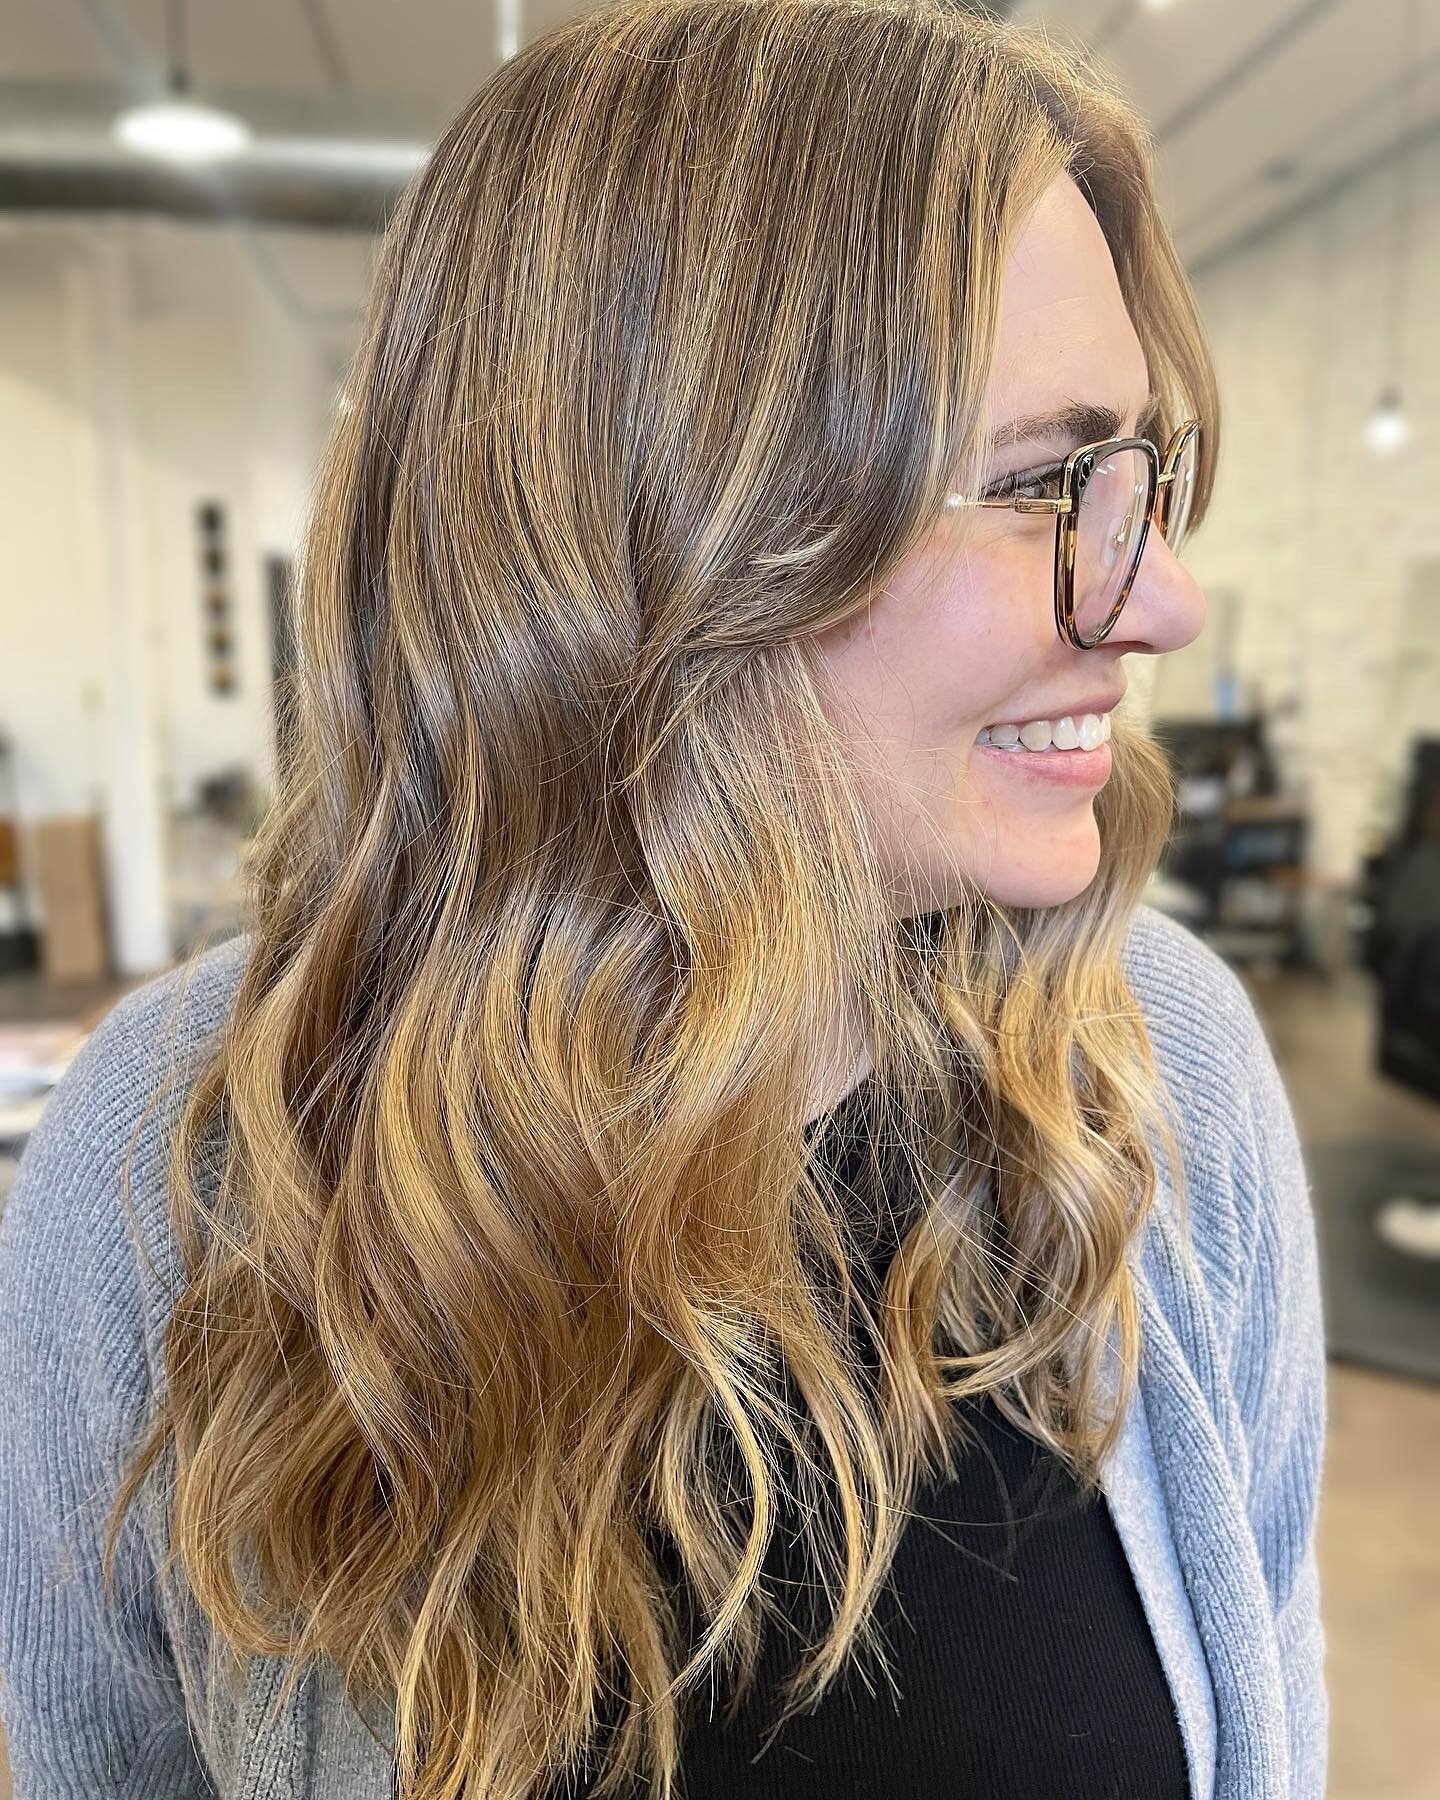 When the before looks like an after, but the after is even better! 🤩
Cut and color by @hilary.embry